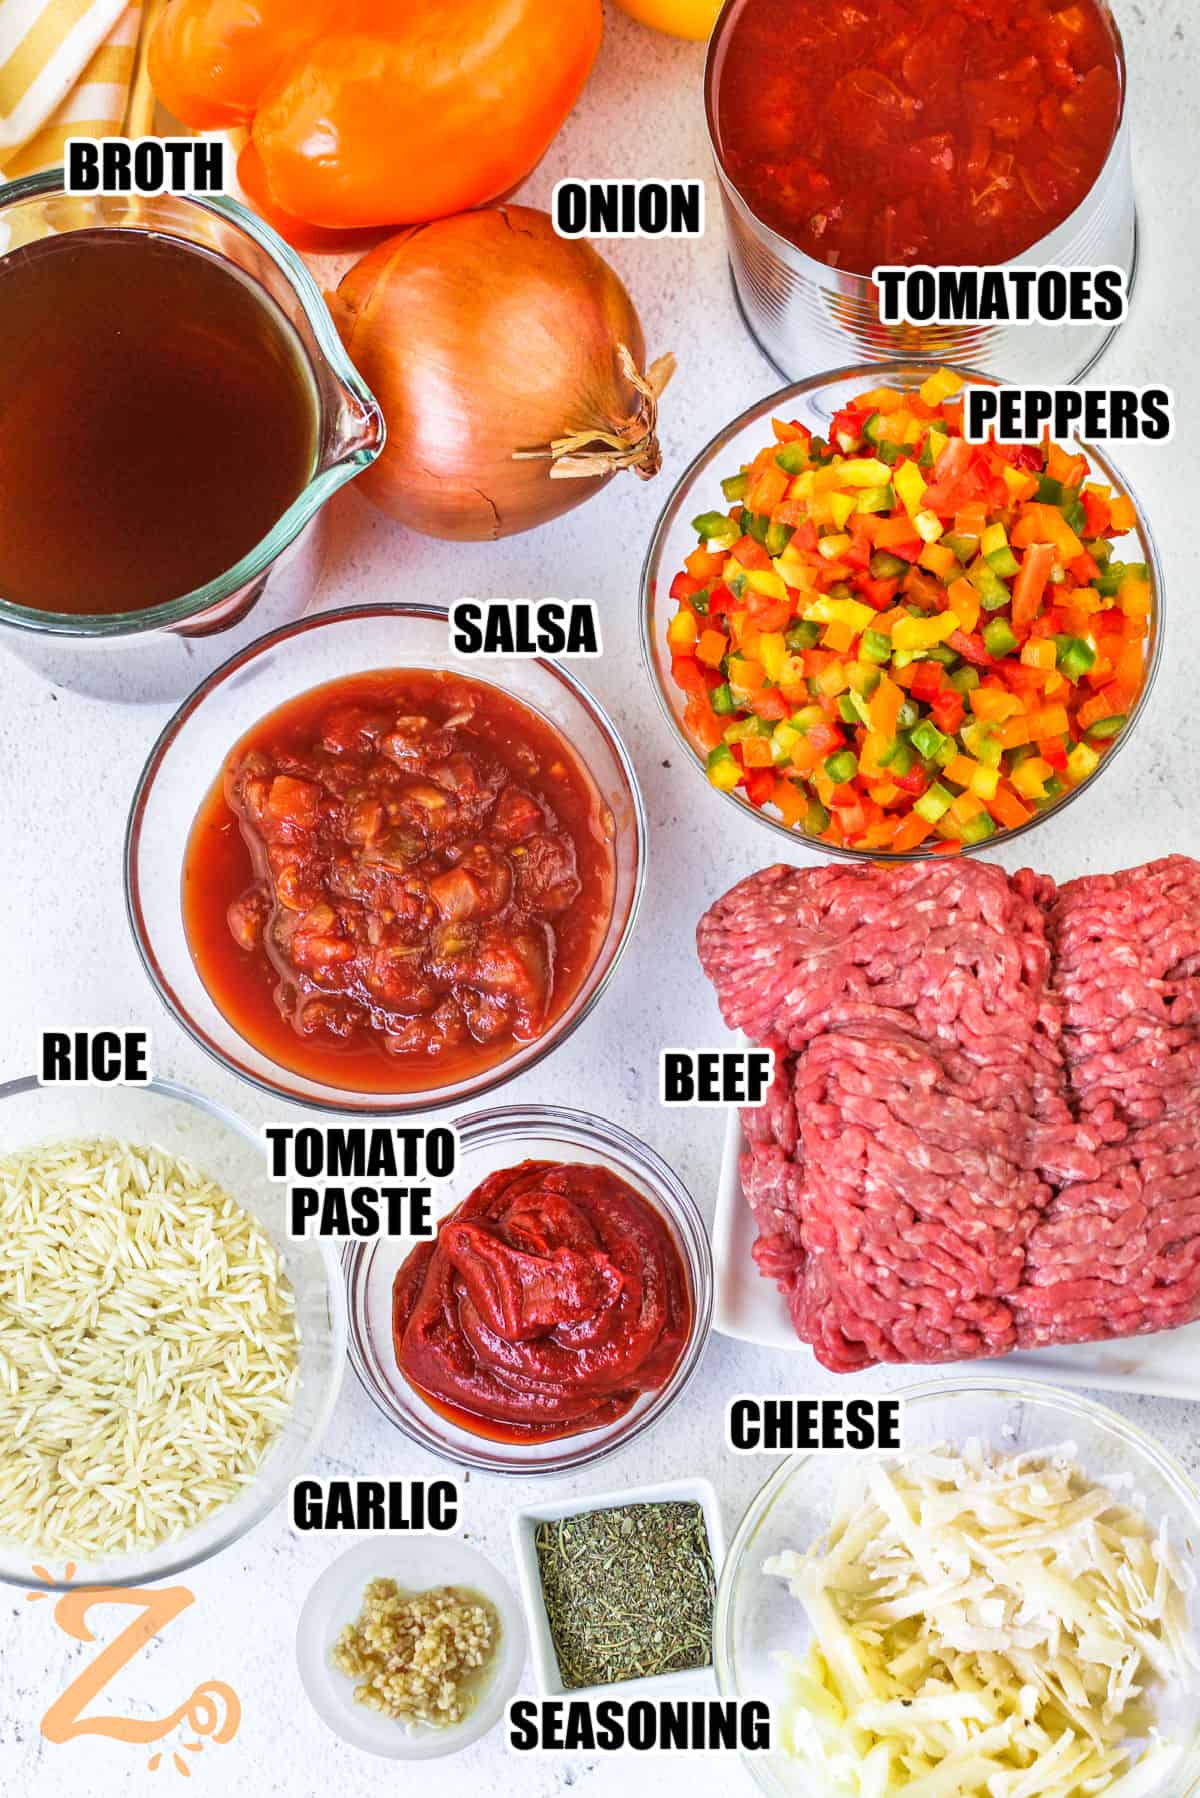 broth , onion , tomatoes , peppers , salsa , rice , beef , romato paste , cheese , seasoning , garlic with labels to make Stuffed Pepper Casserole